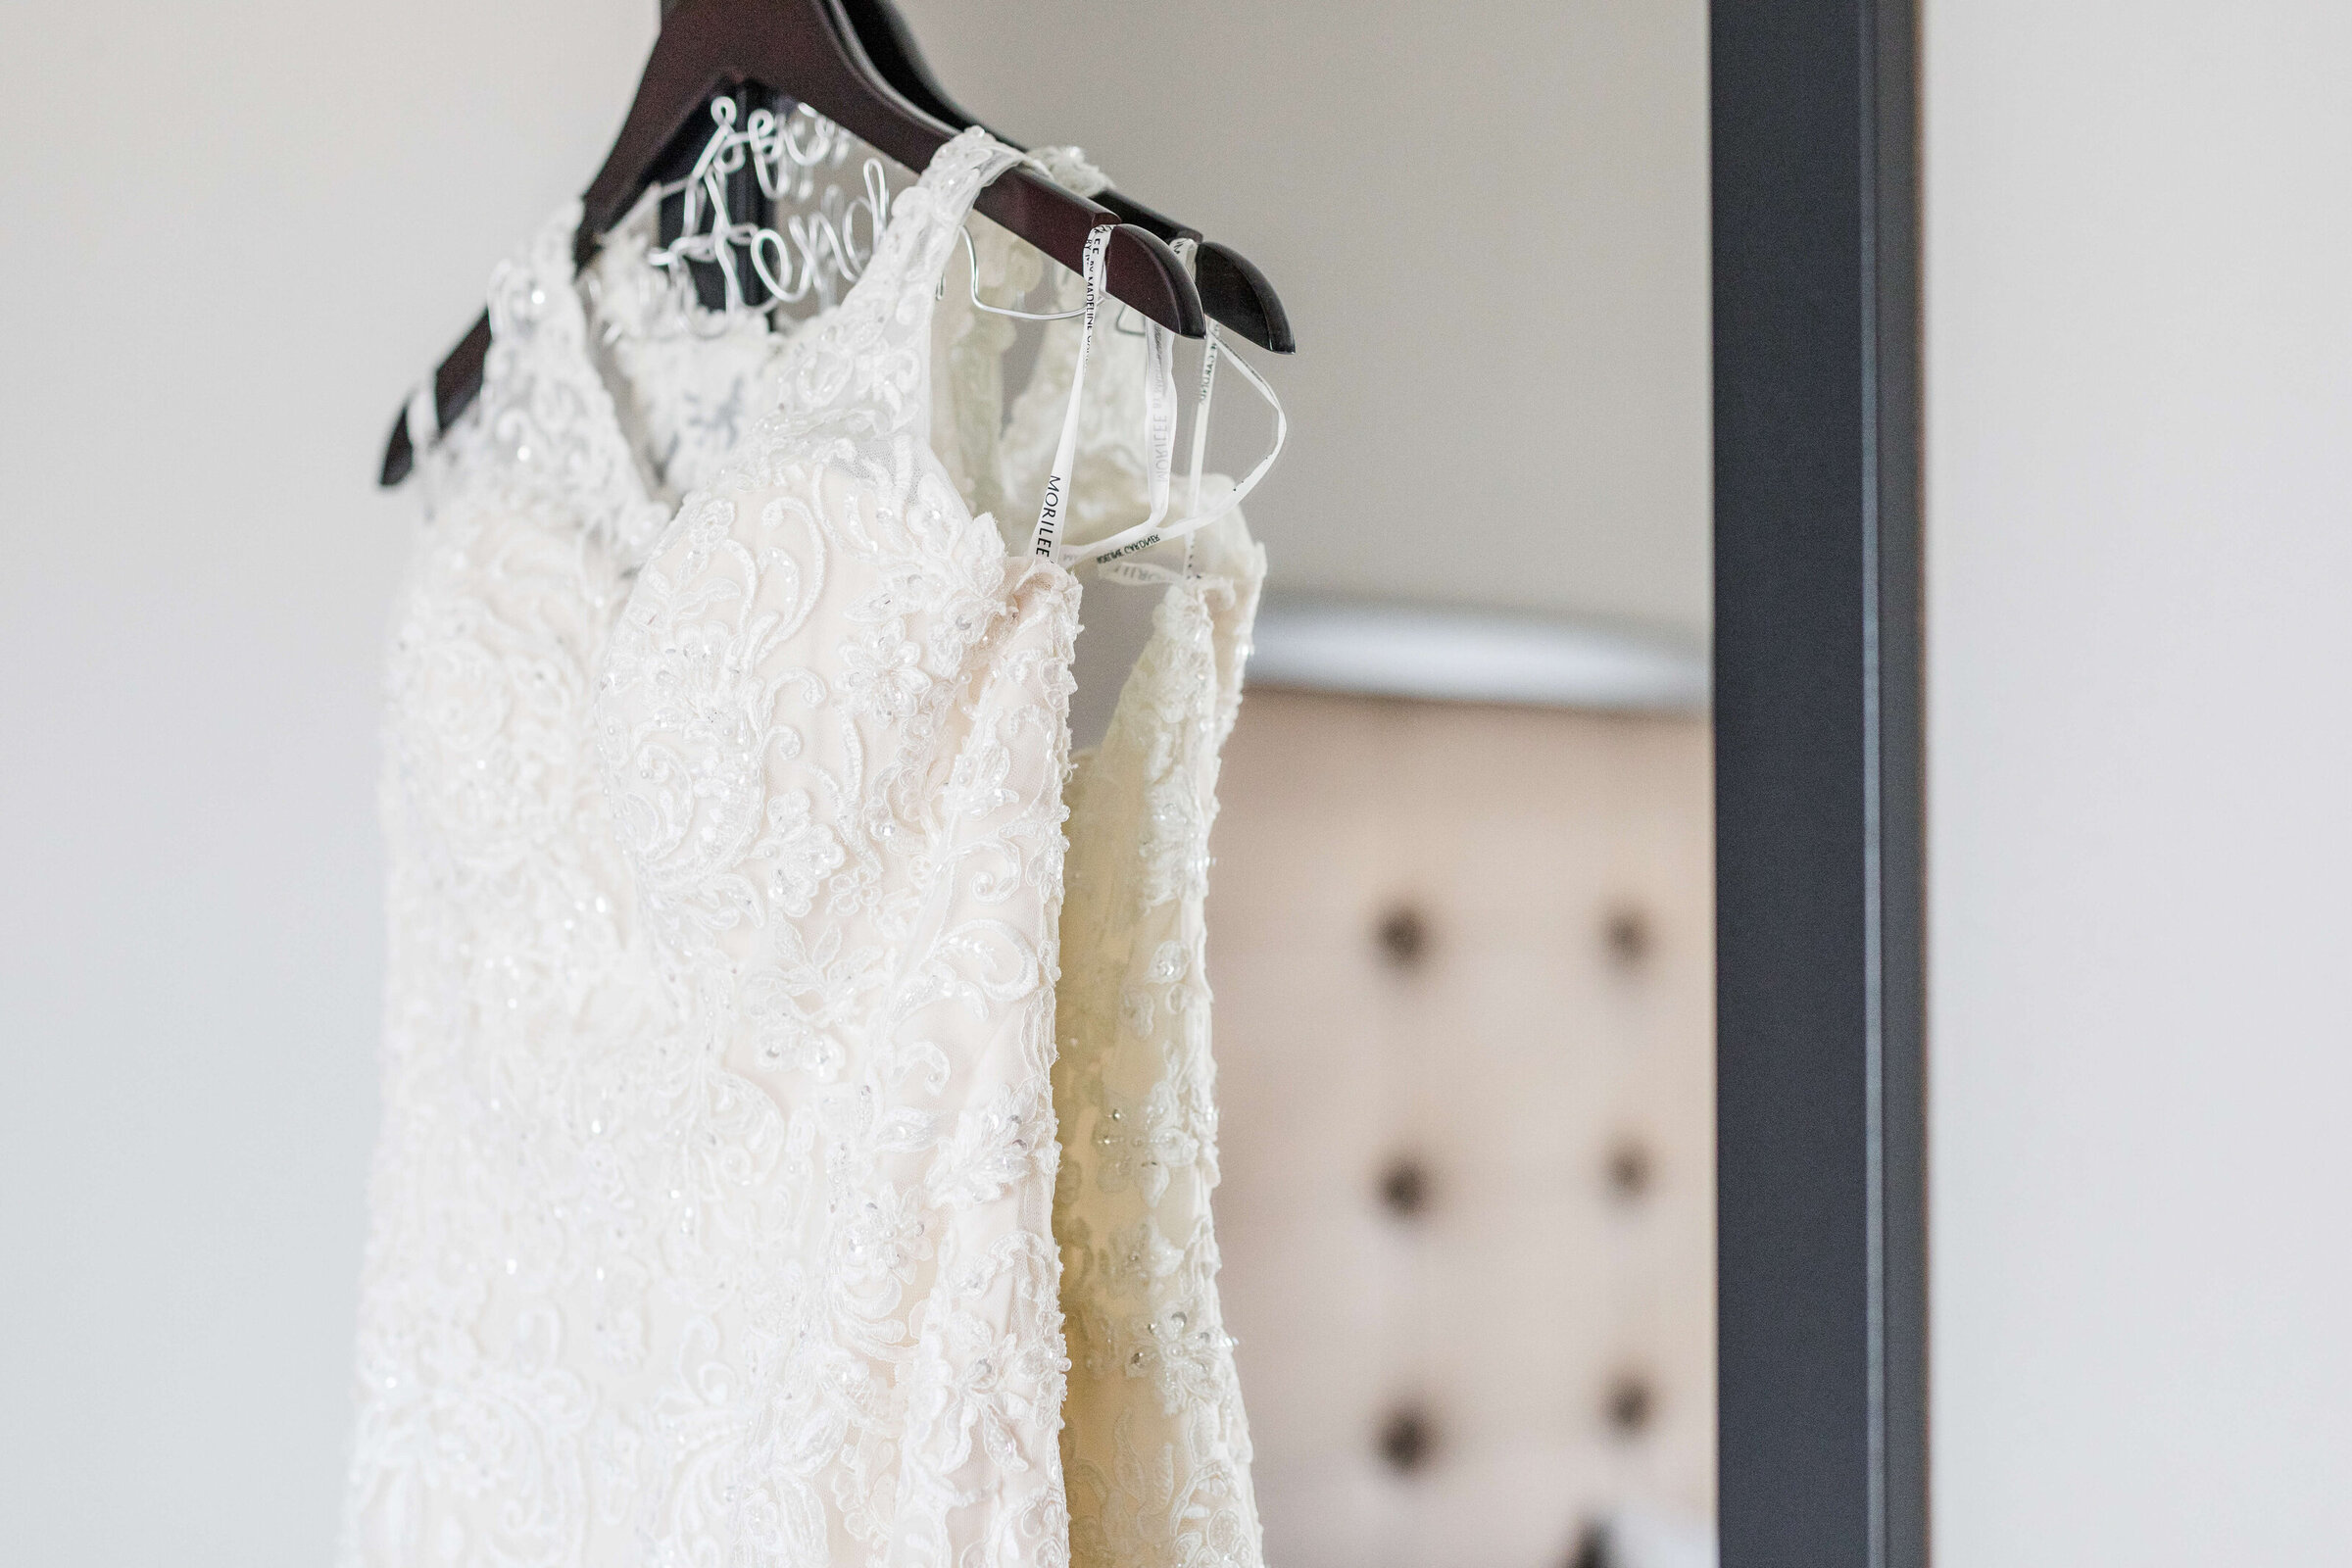 A wedding gown hanging on a mirror in a hotel room. You can see the reflection of the bed in the mirror.